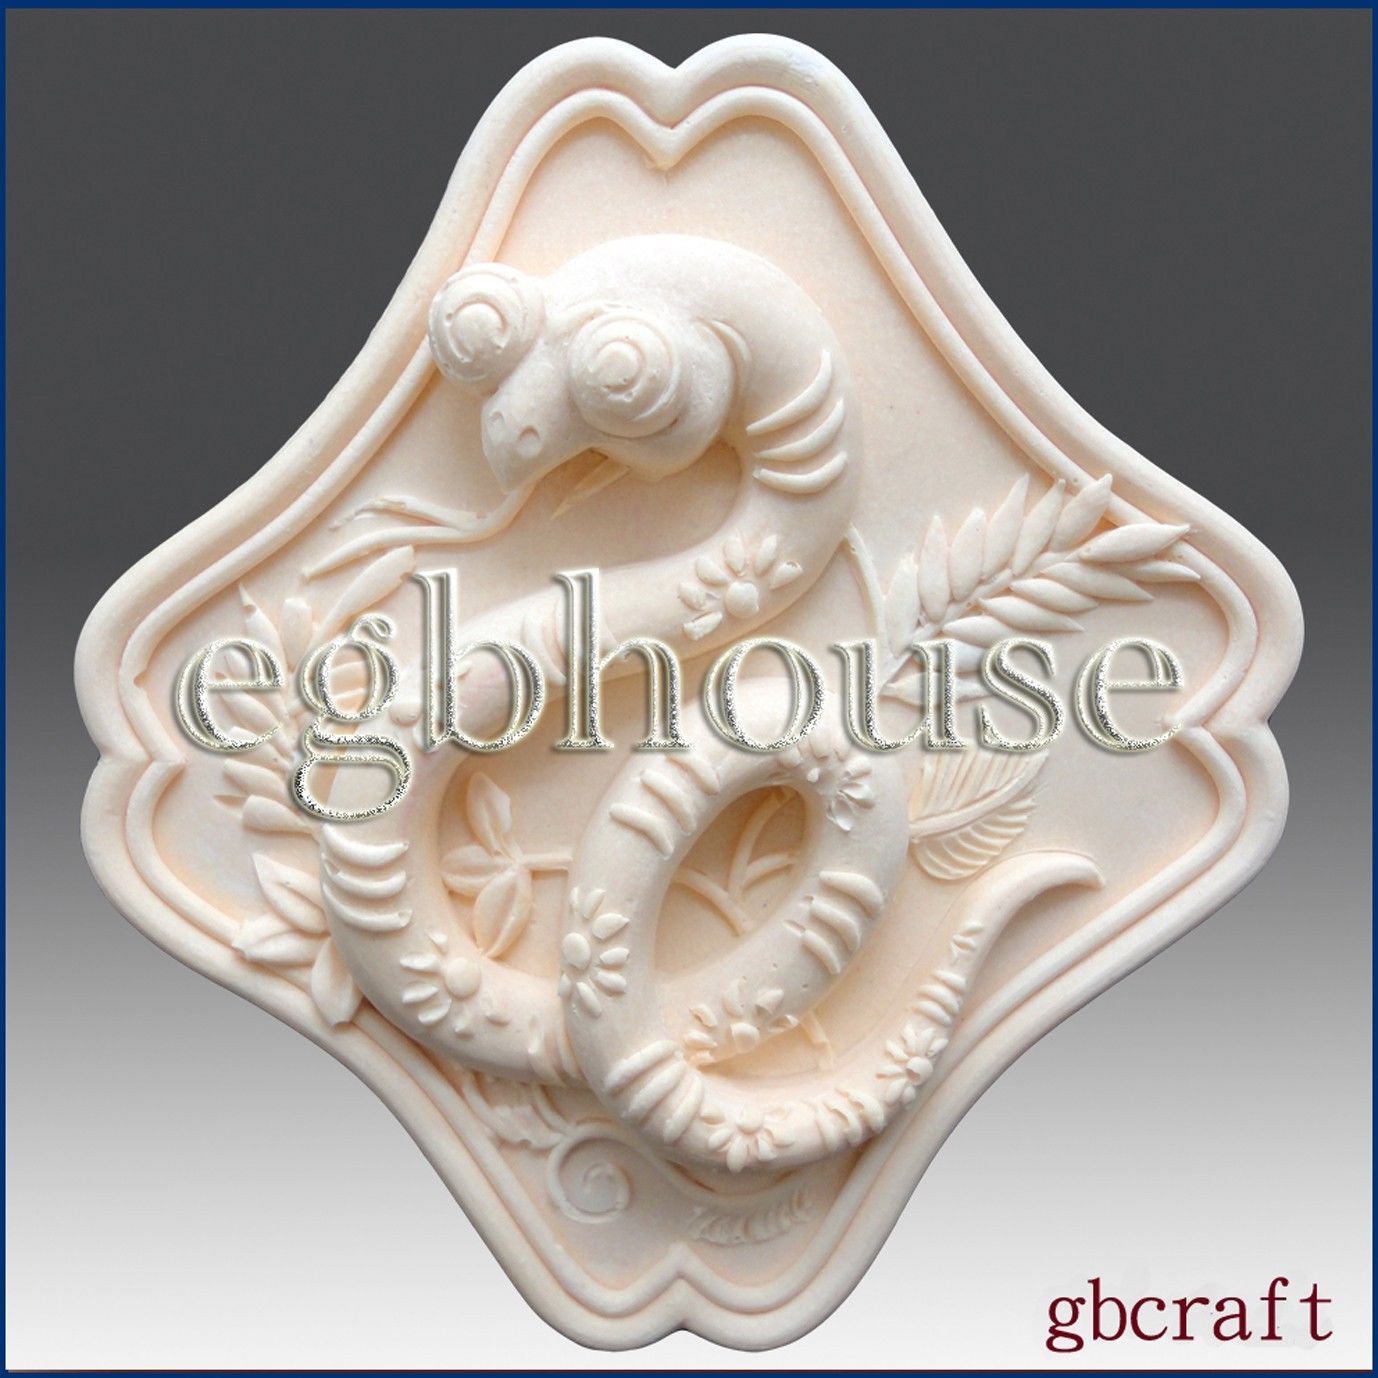 2D Silicone Soap Mold - Oriental Zodiac Sign - Snake - new design for 2013